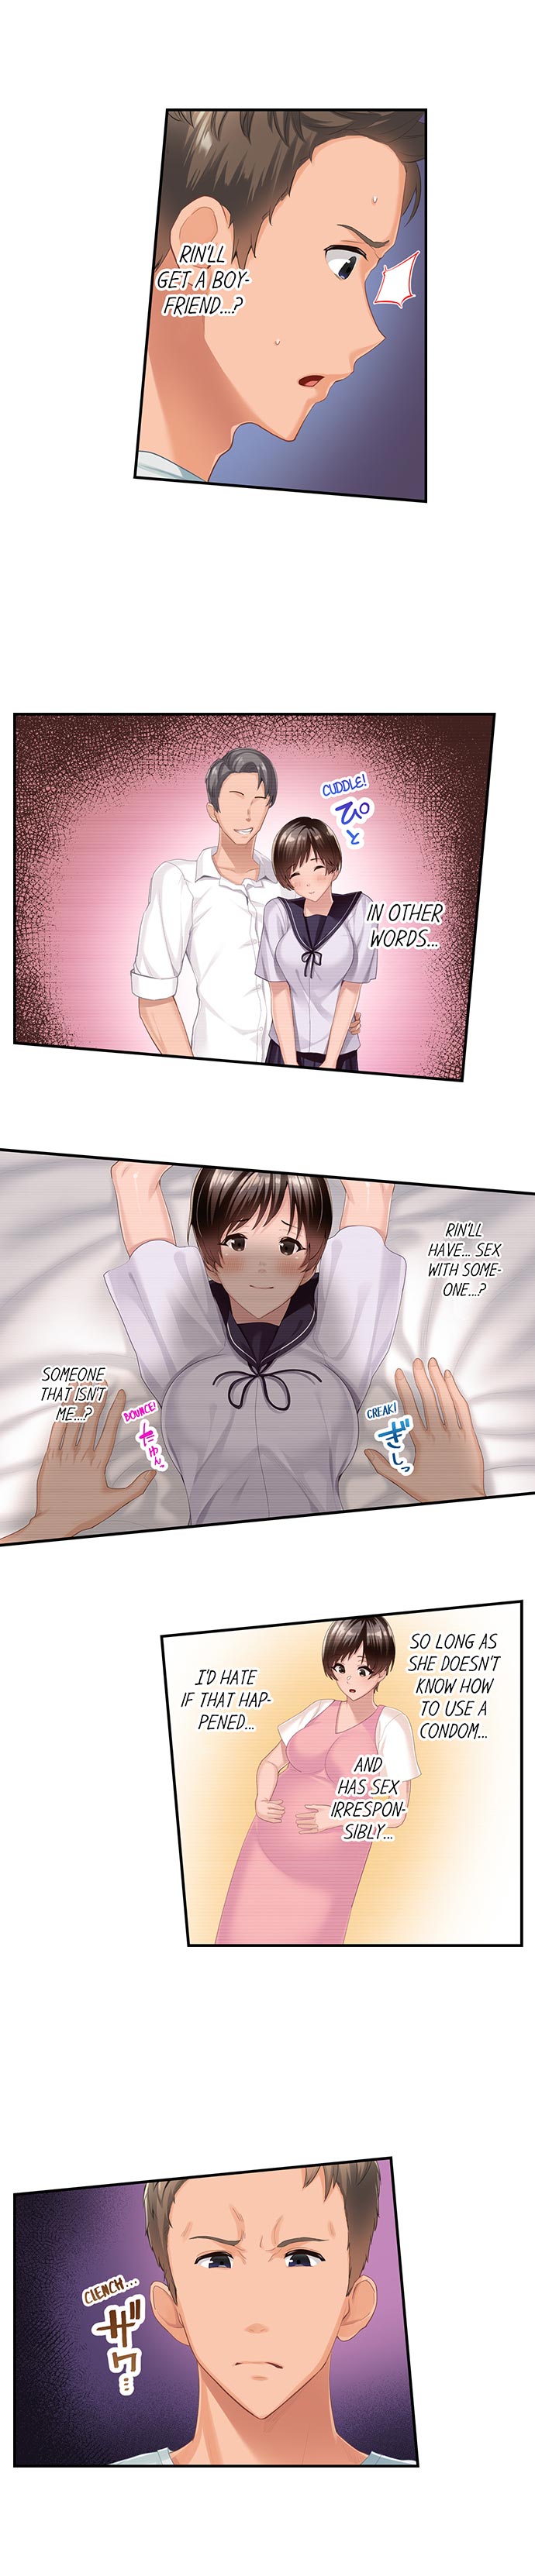 Using 100 Boxes of Condoms With My Childhood Friend! - Chapter 2 Page 2